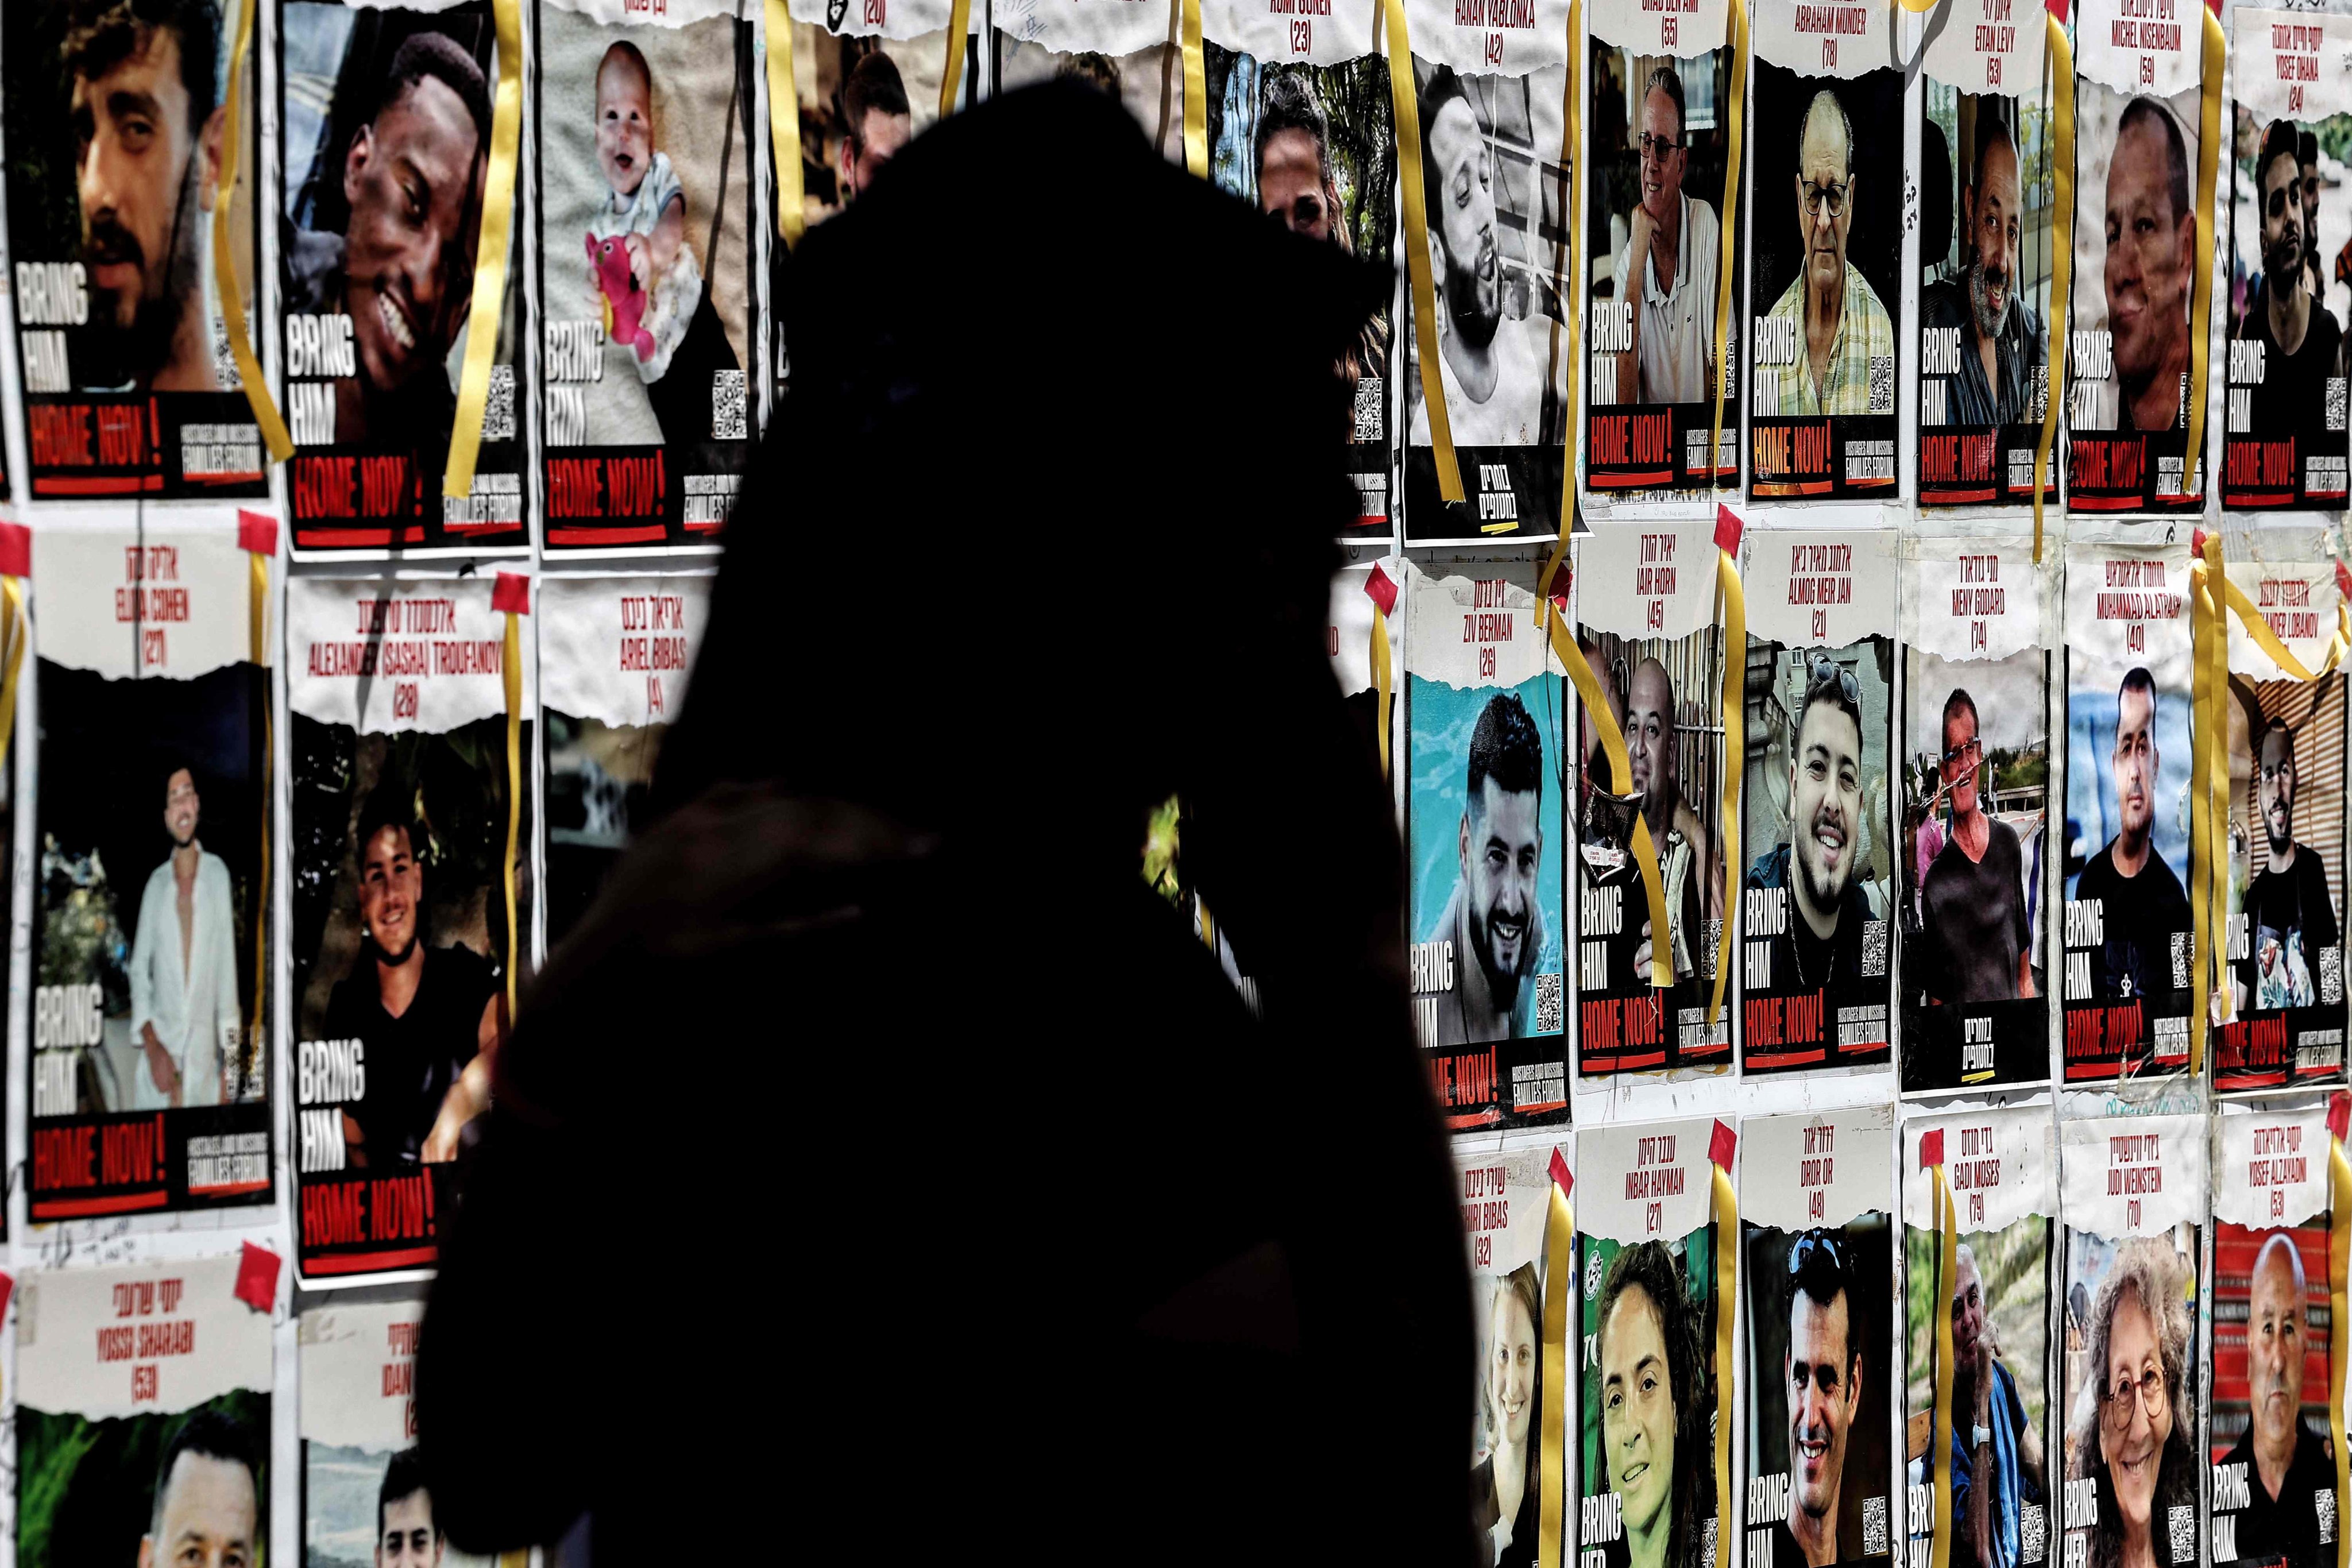 A demonstrator walks past posters of Israeli hostages held in Gaza during a protest outside Israeli defence ministry headquarters in Tel Aviv on Thursday. Photo: AFP